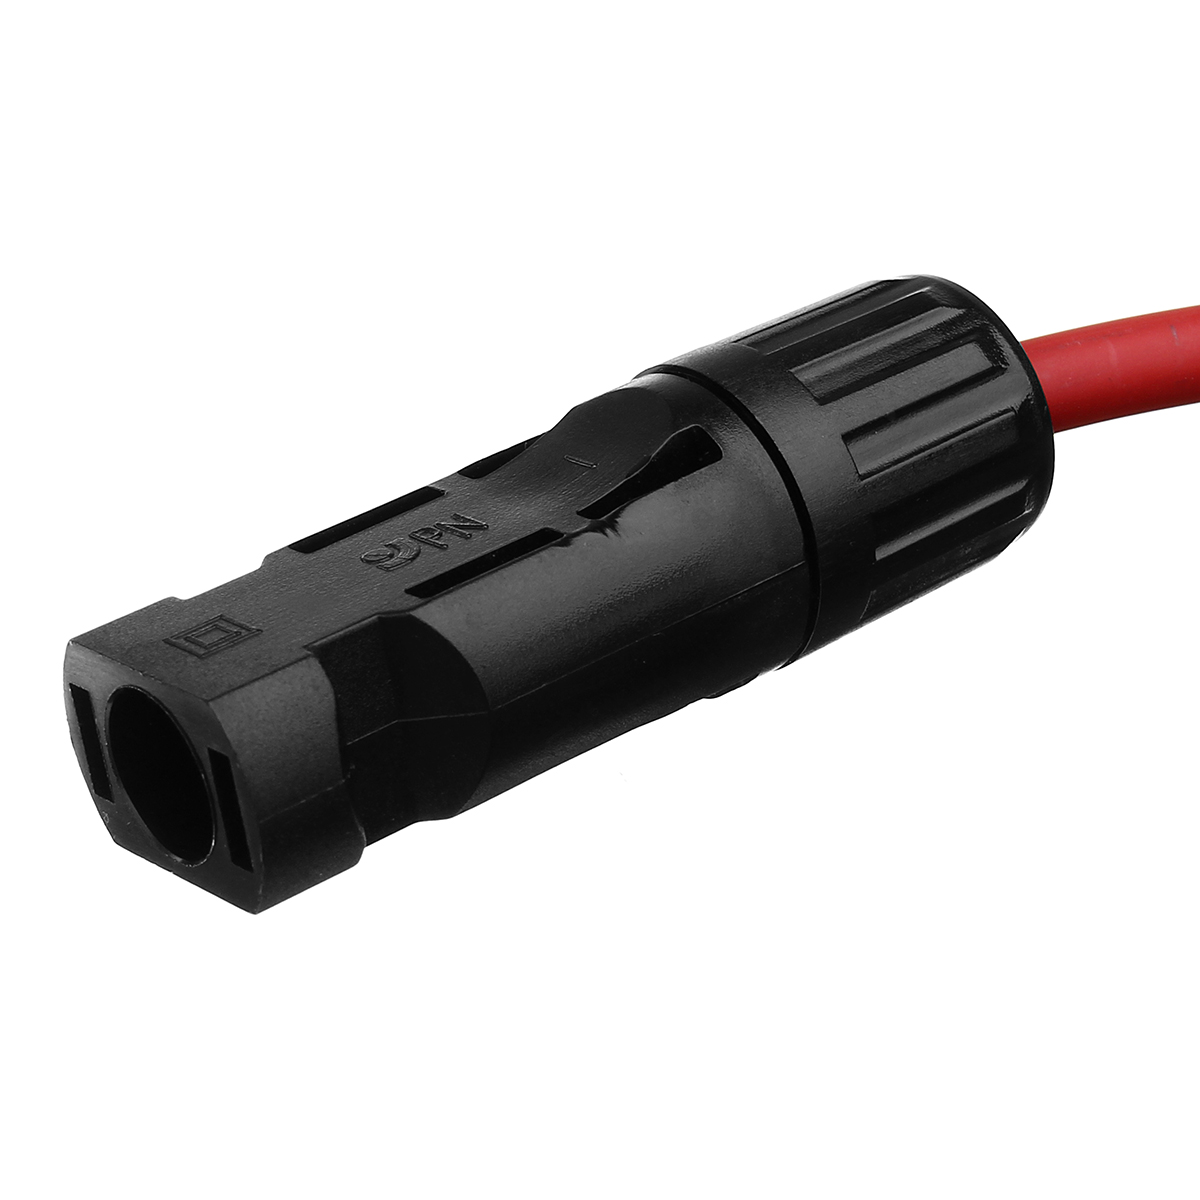 12-AWG-20-Meter-Solar-Panel-Extension-Cable-Wire-BlackRed-with-MC4-Connectors-1338749-7